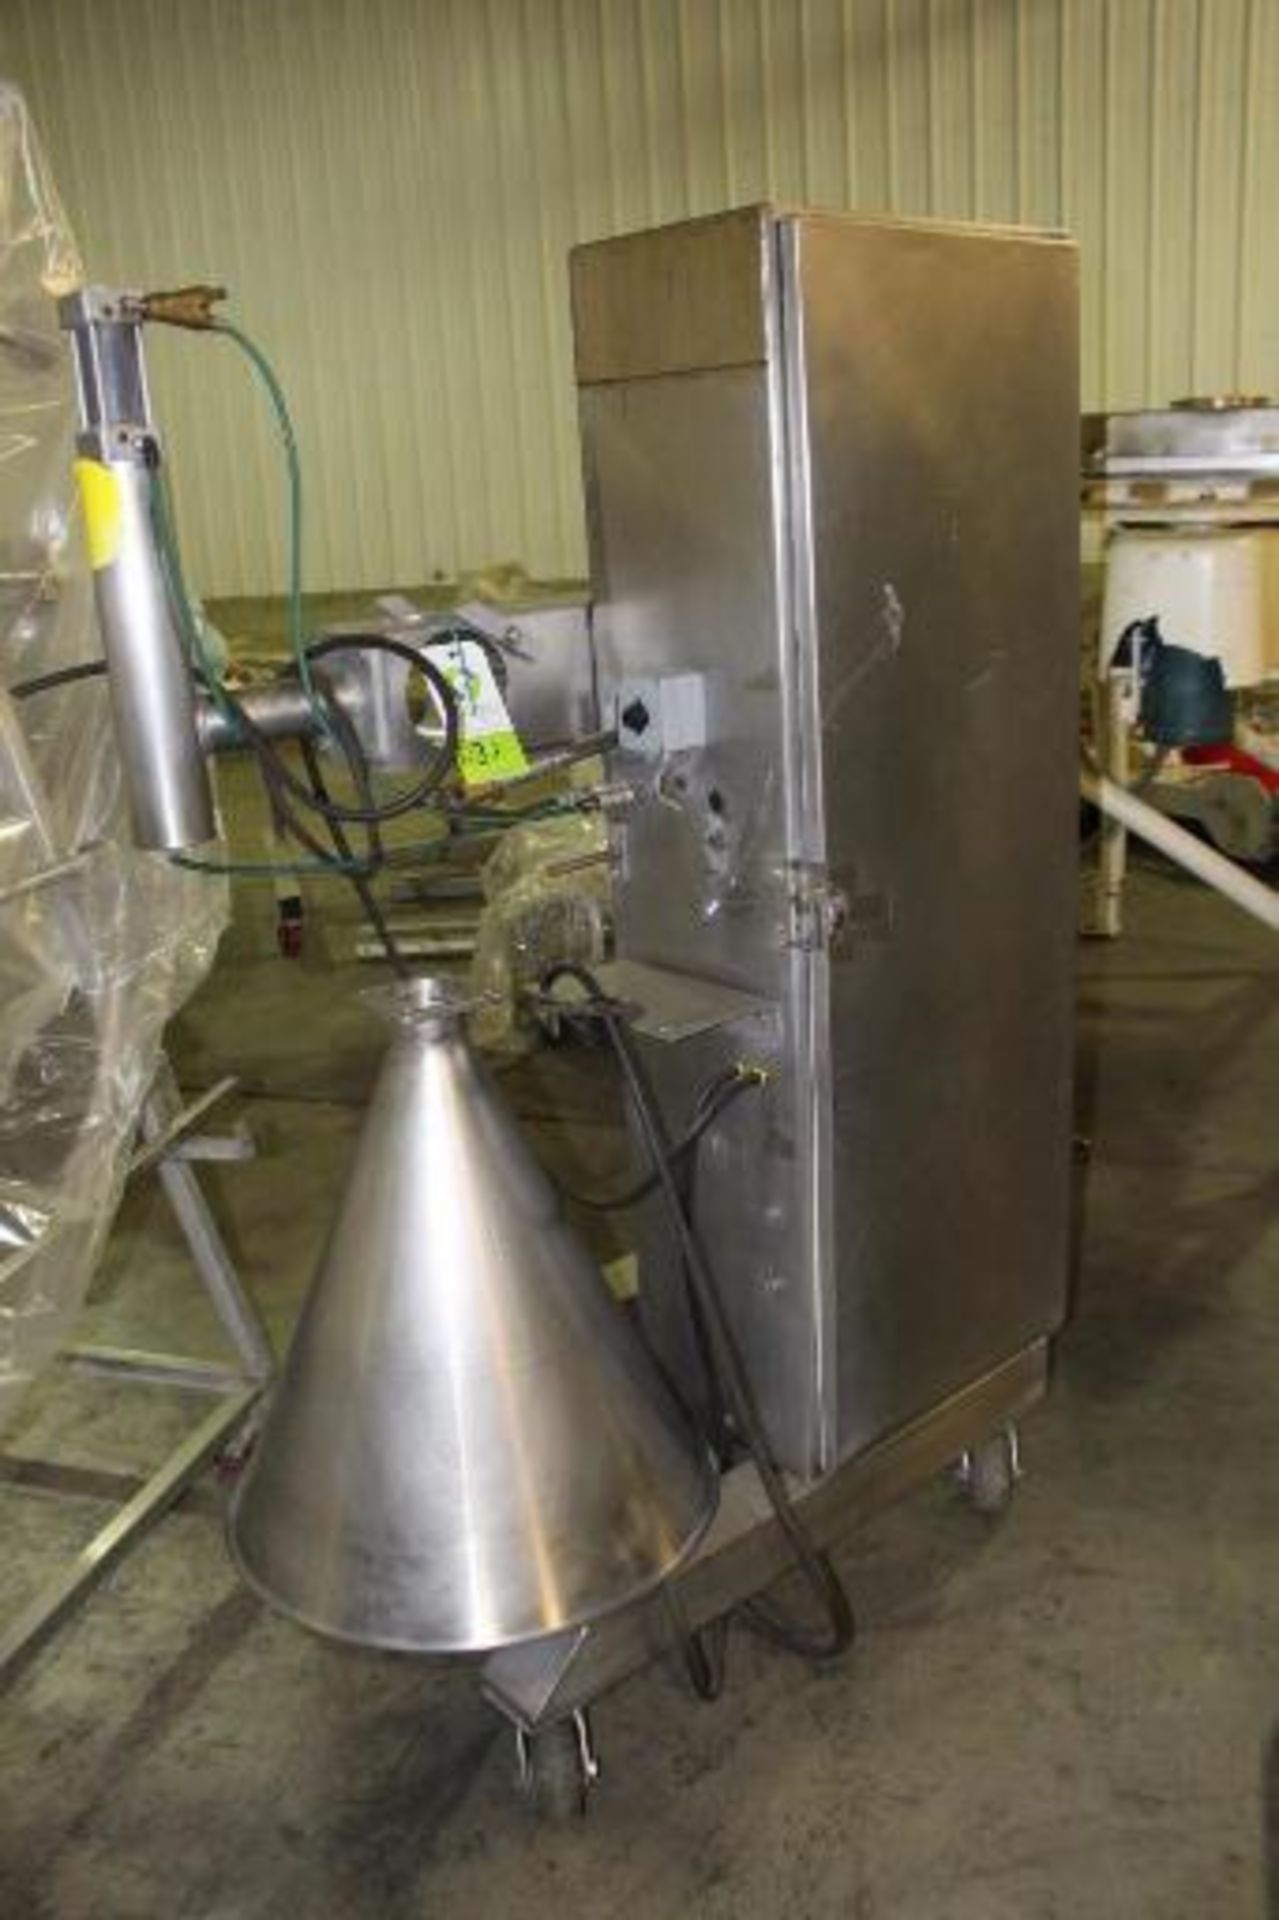 Stainless Steel Piston Filler-Depositor Stainless Steel Construction Cone Hopper This Unit Is